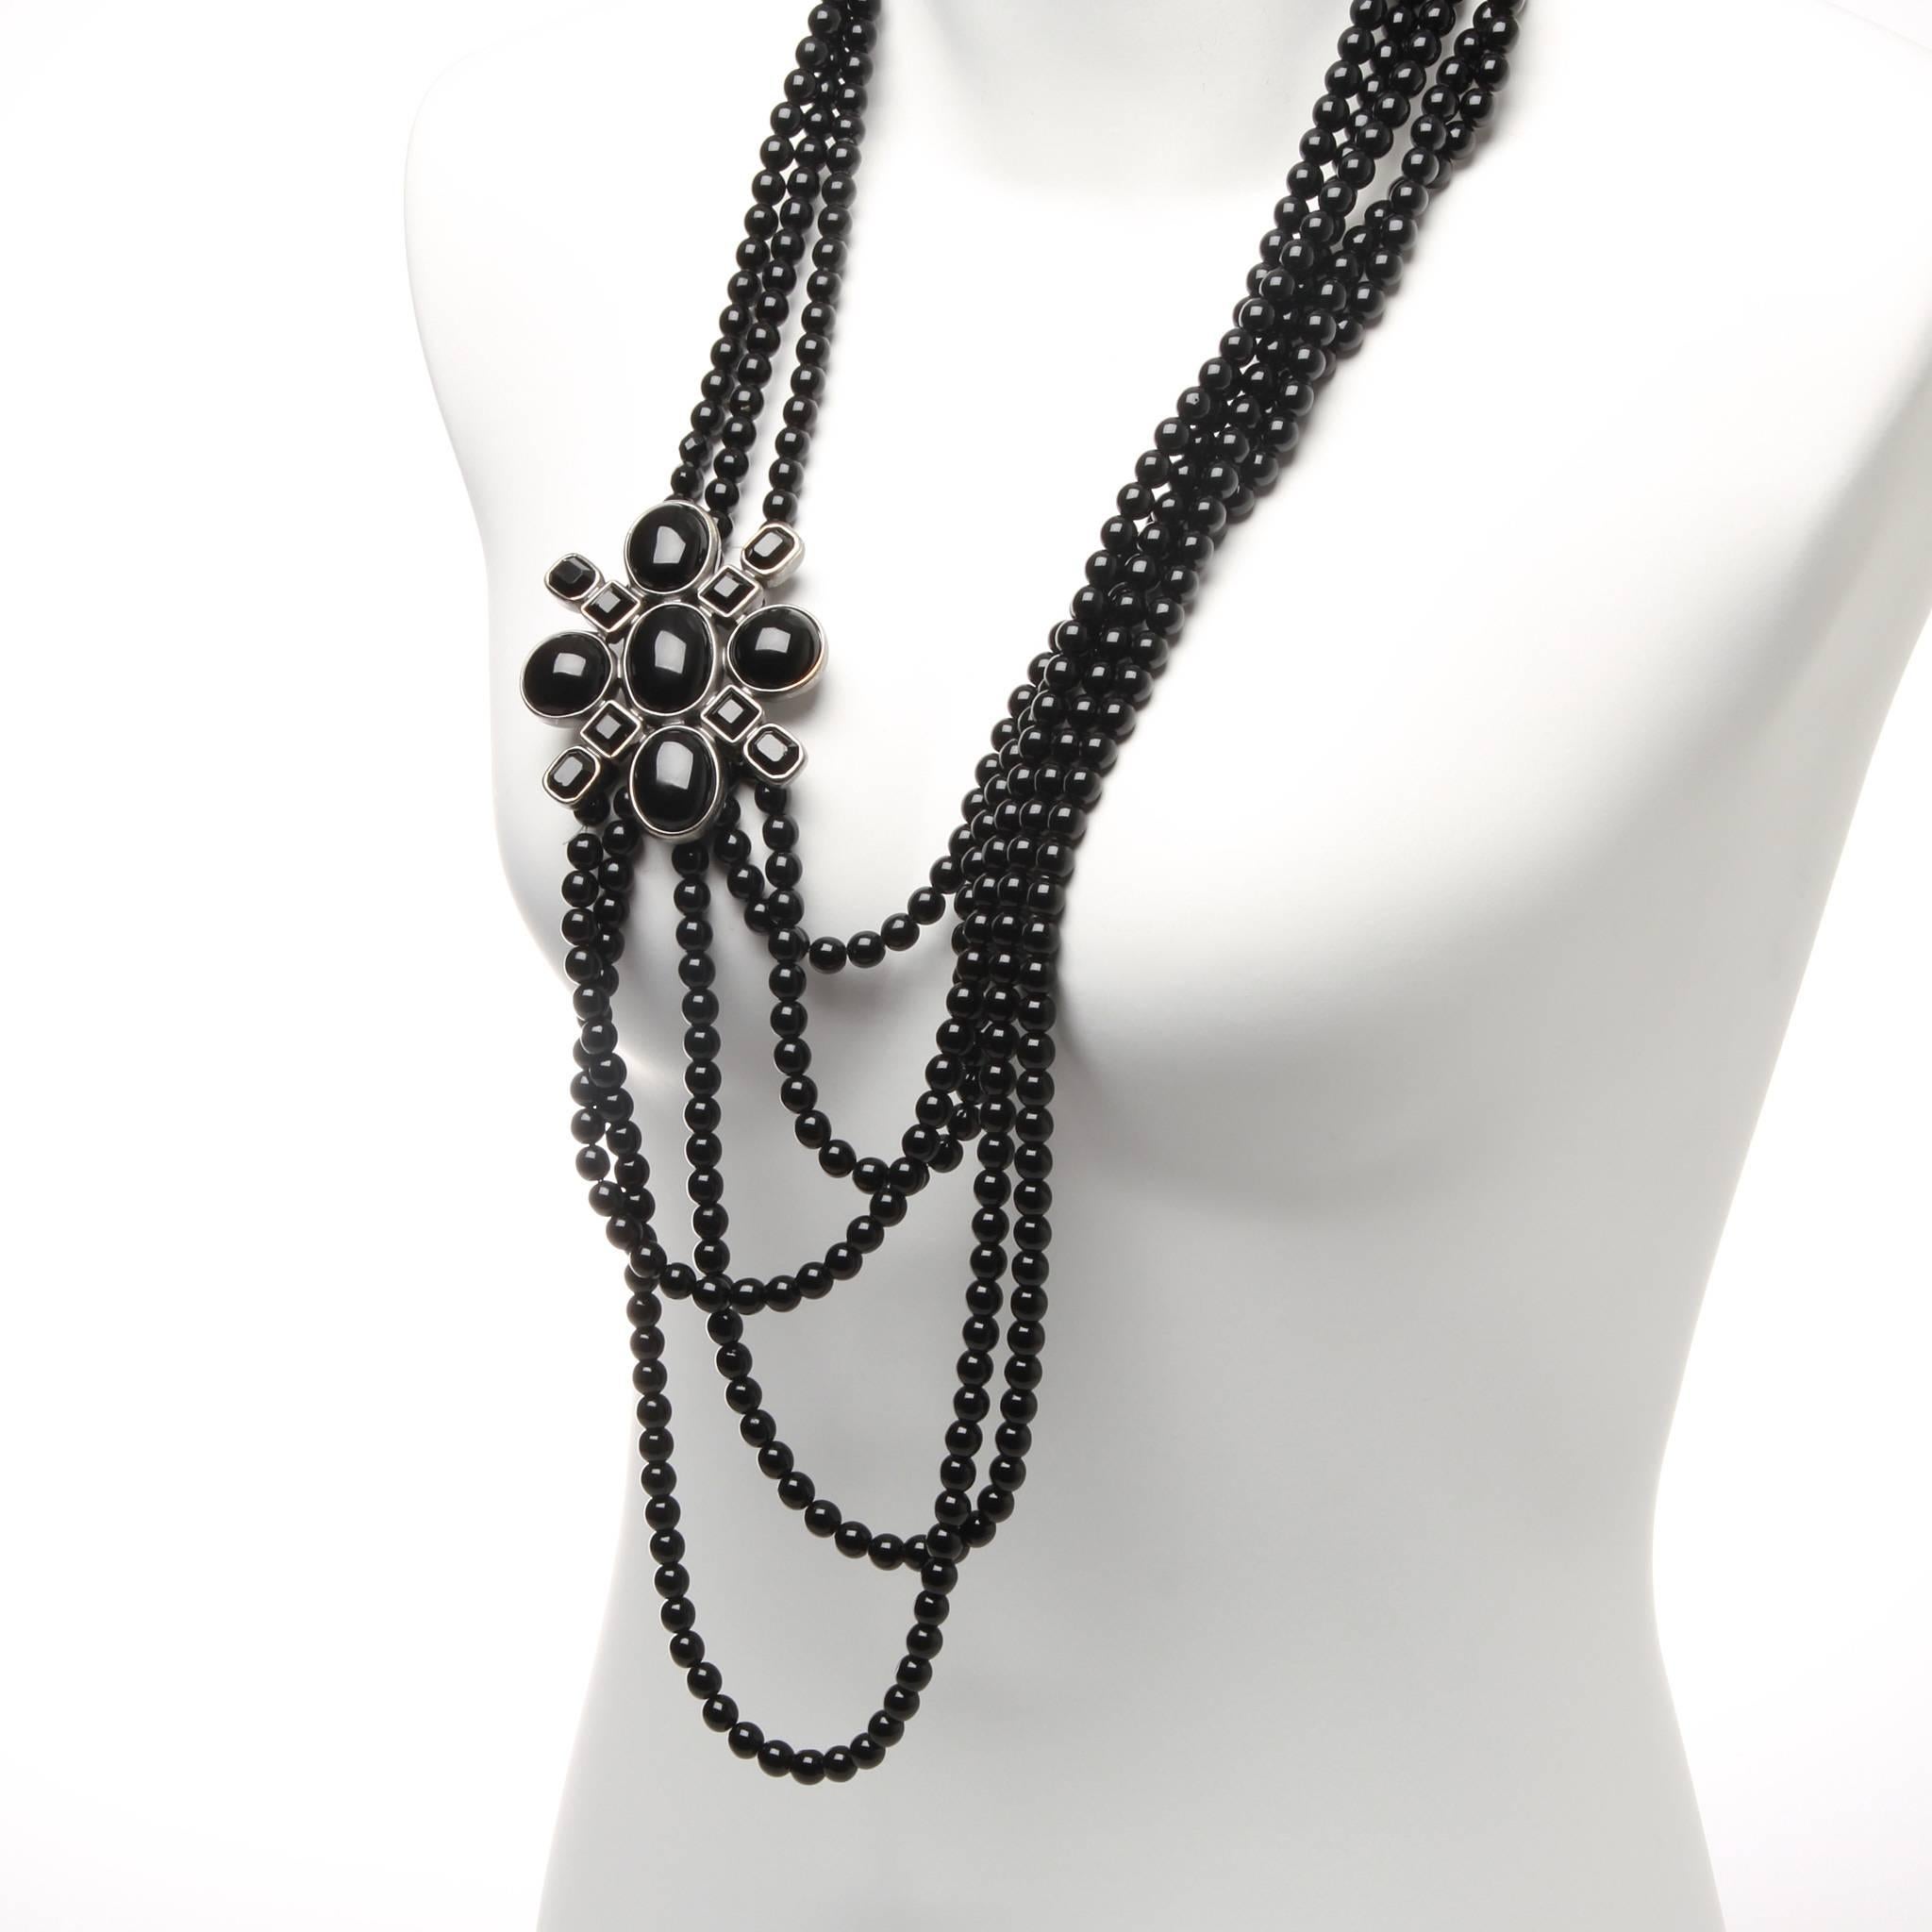 FINAL SALE

CHANEL Black Multi-Strand Beaded Necklace With Flower Charm

Age: 2005
Made In France
Materials: Beads, Resin, Silvertone Hardware.
Features Three Draped Beaded Strands With A Jeweled Flower Pin Accent. Other Side Of Flower Has Five